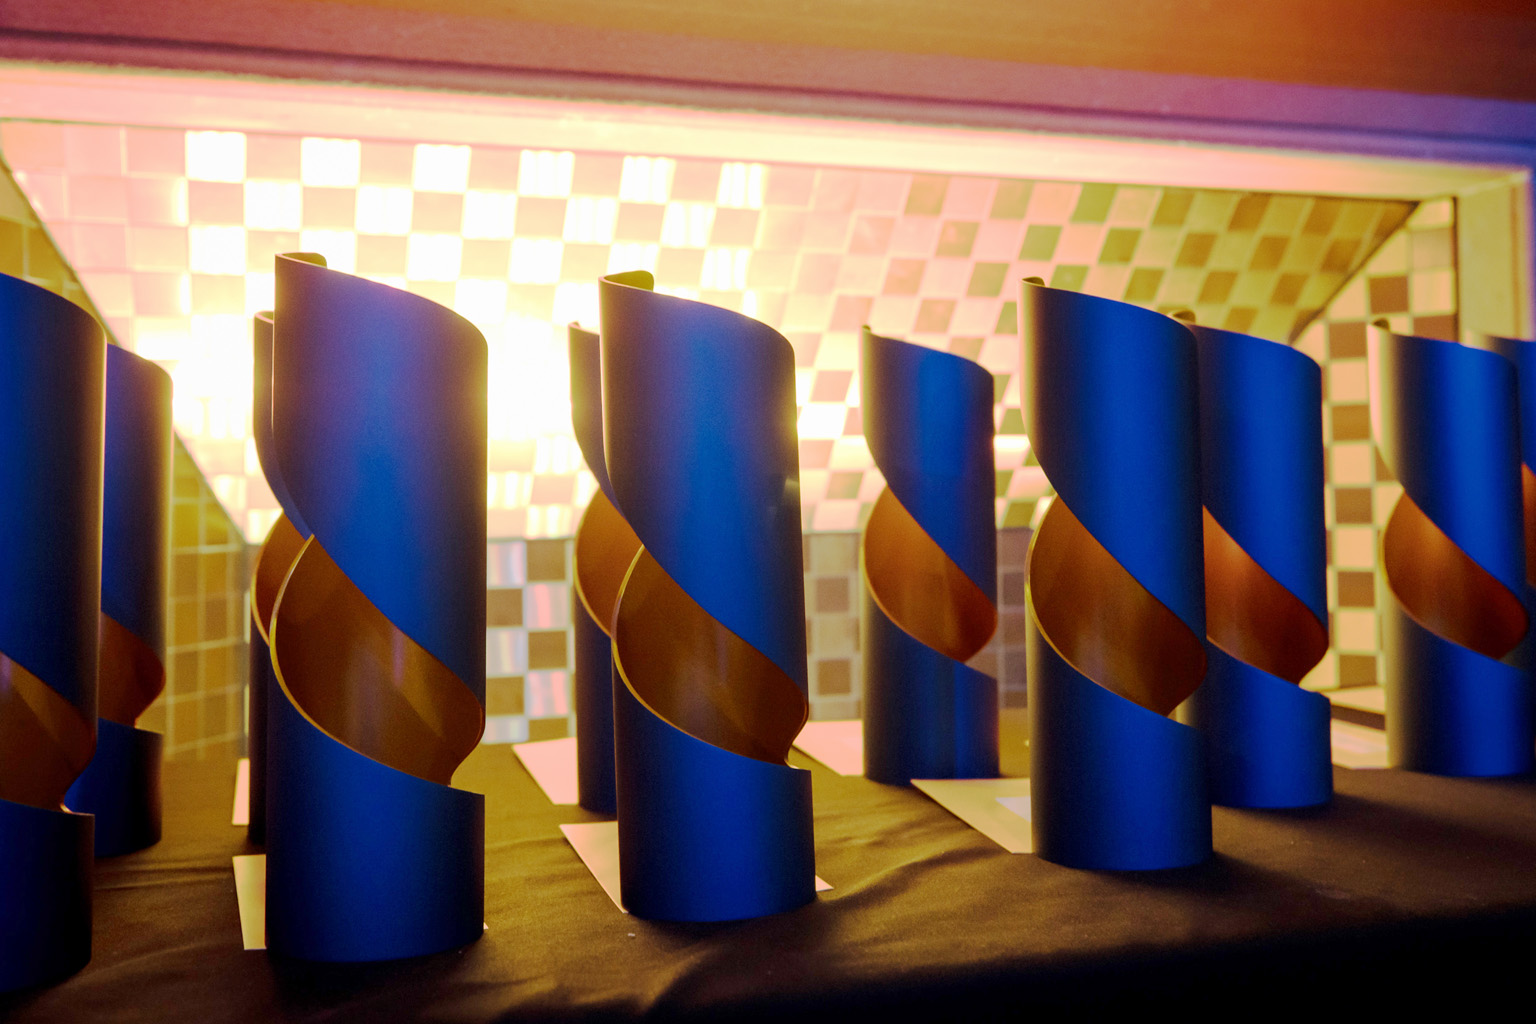 Media awards trophies lined up on a table